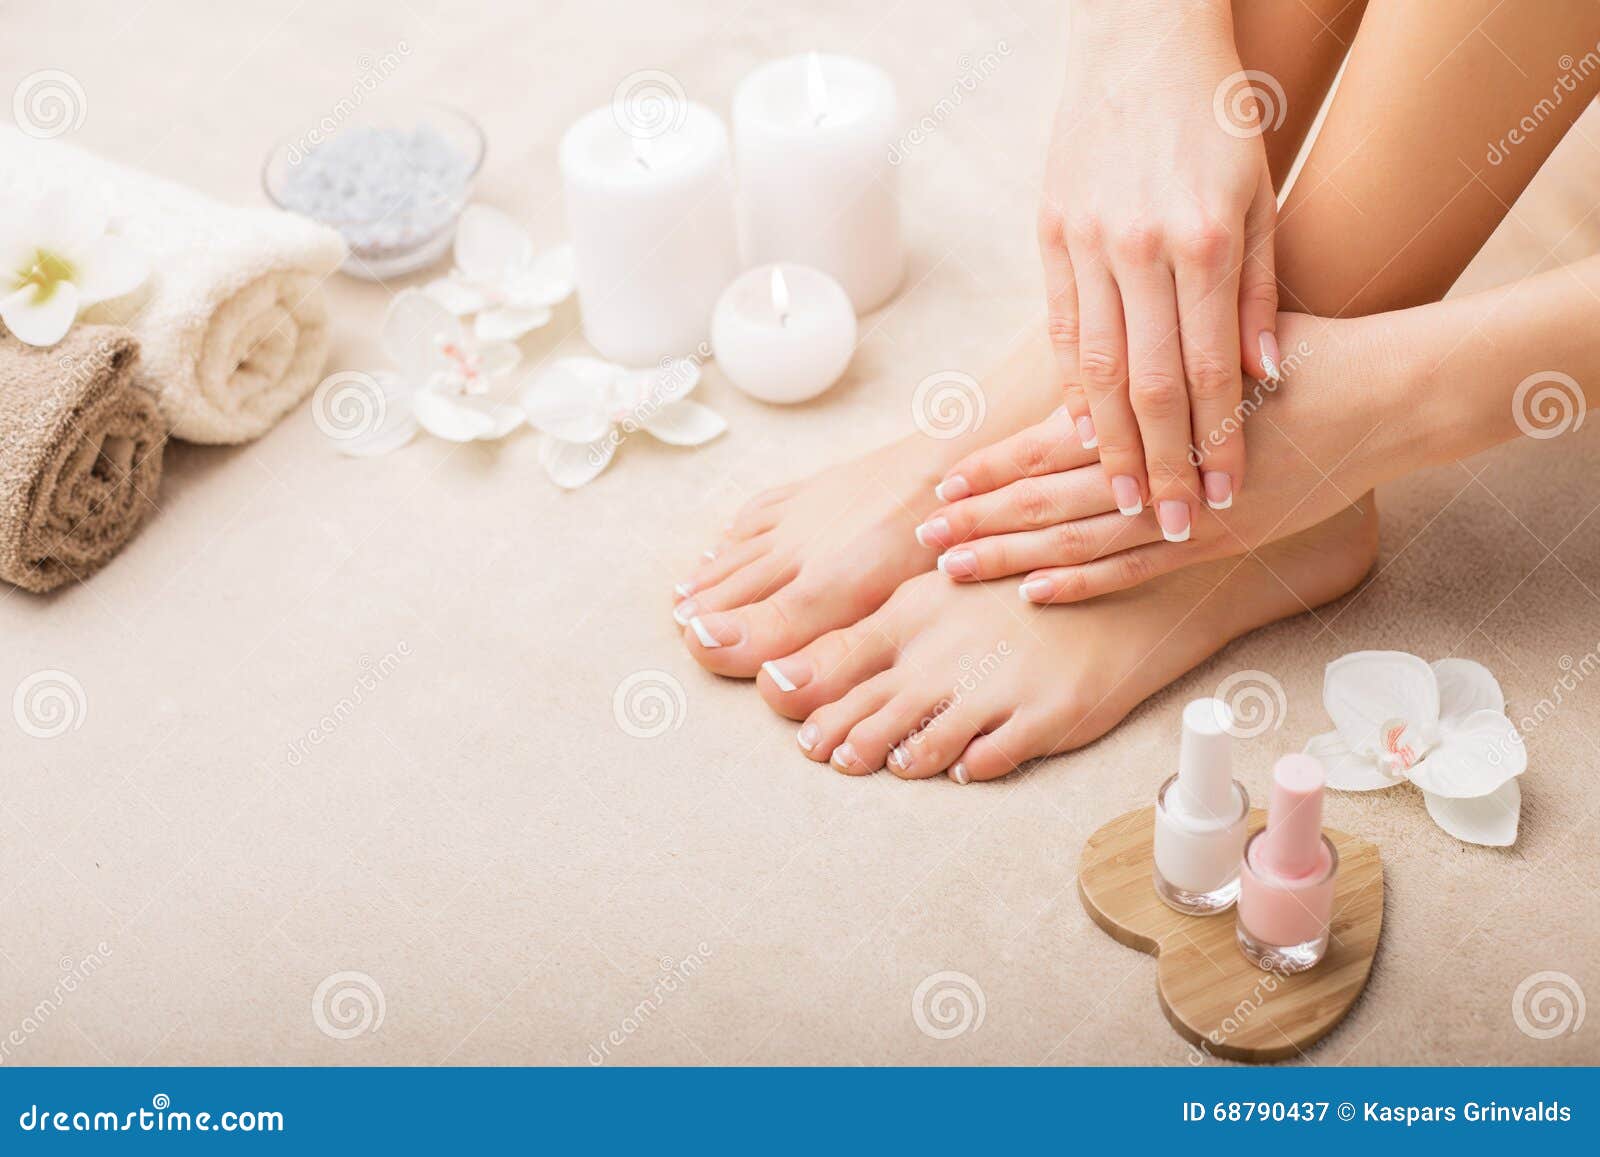 french manicure and pedicure